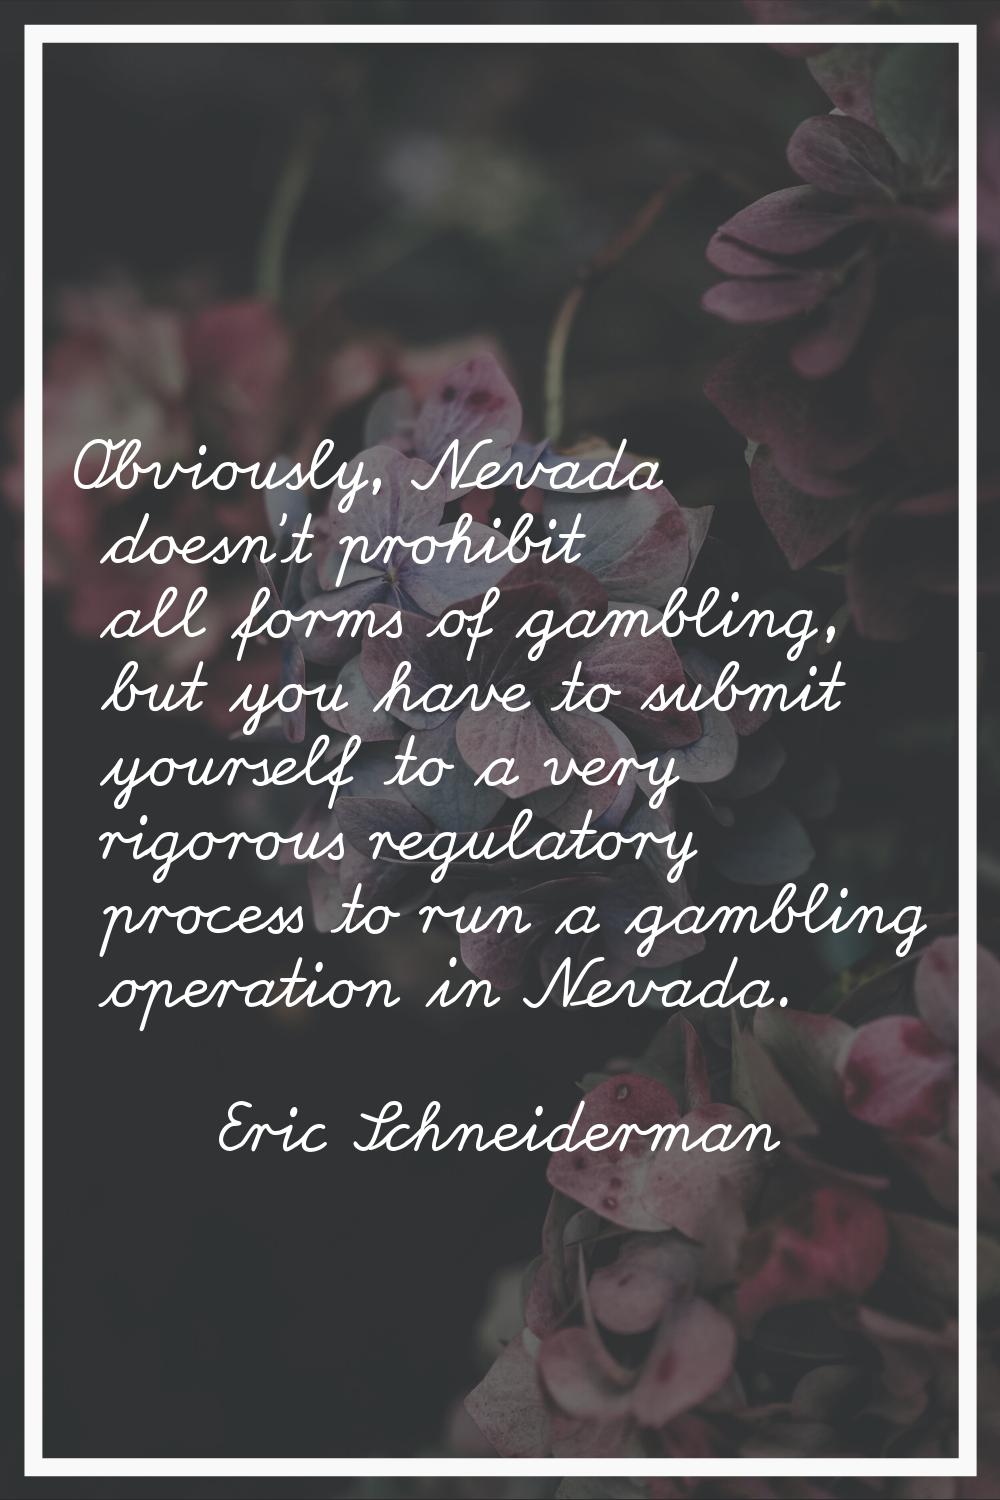 Obviously, Nevada doesn't prohibit all forms of gambling, but you have to submit yourself to a very